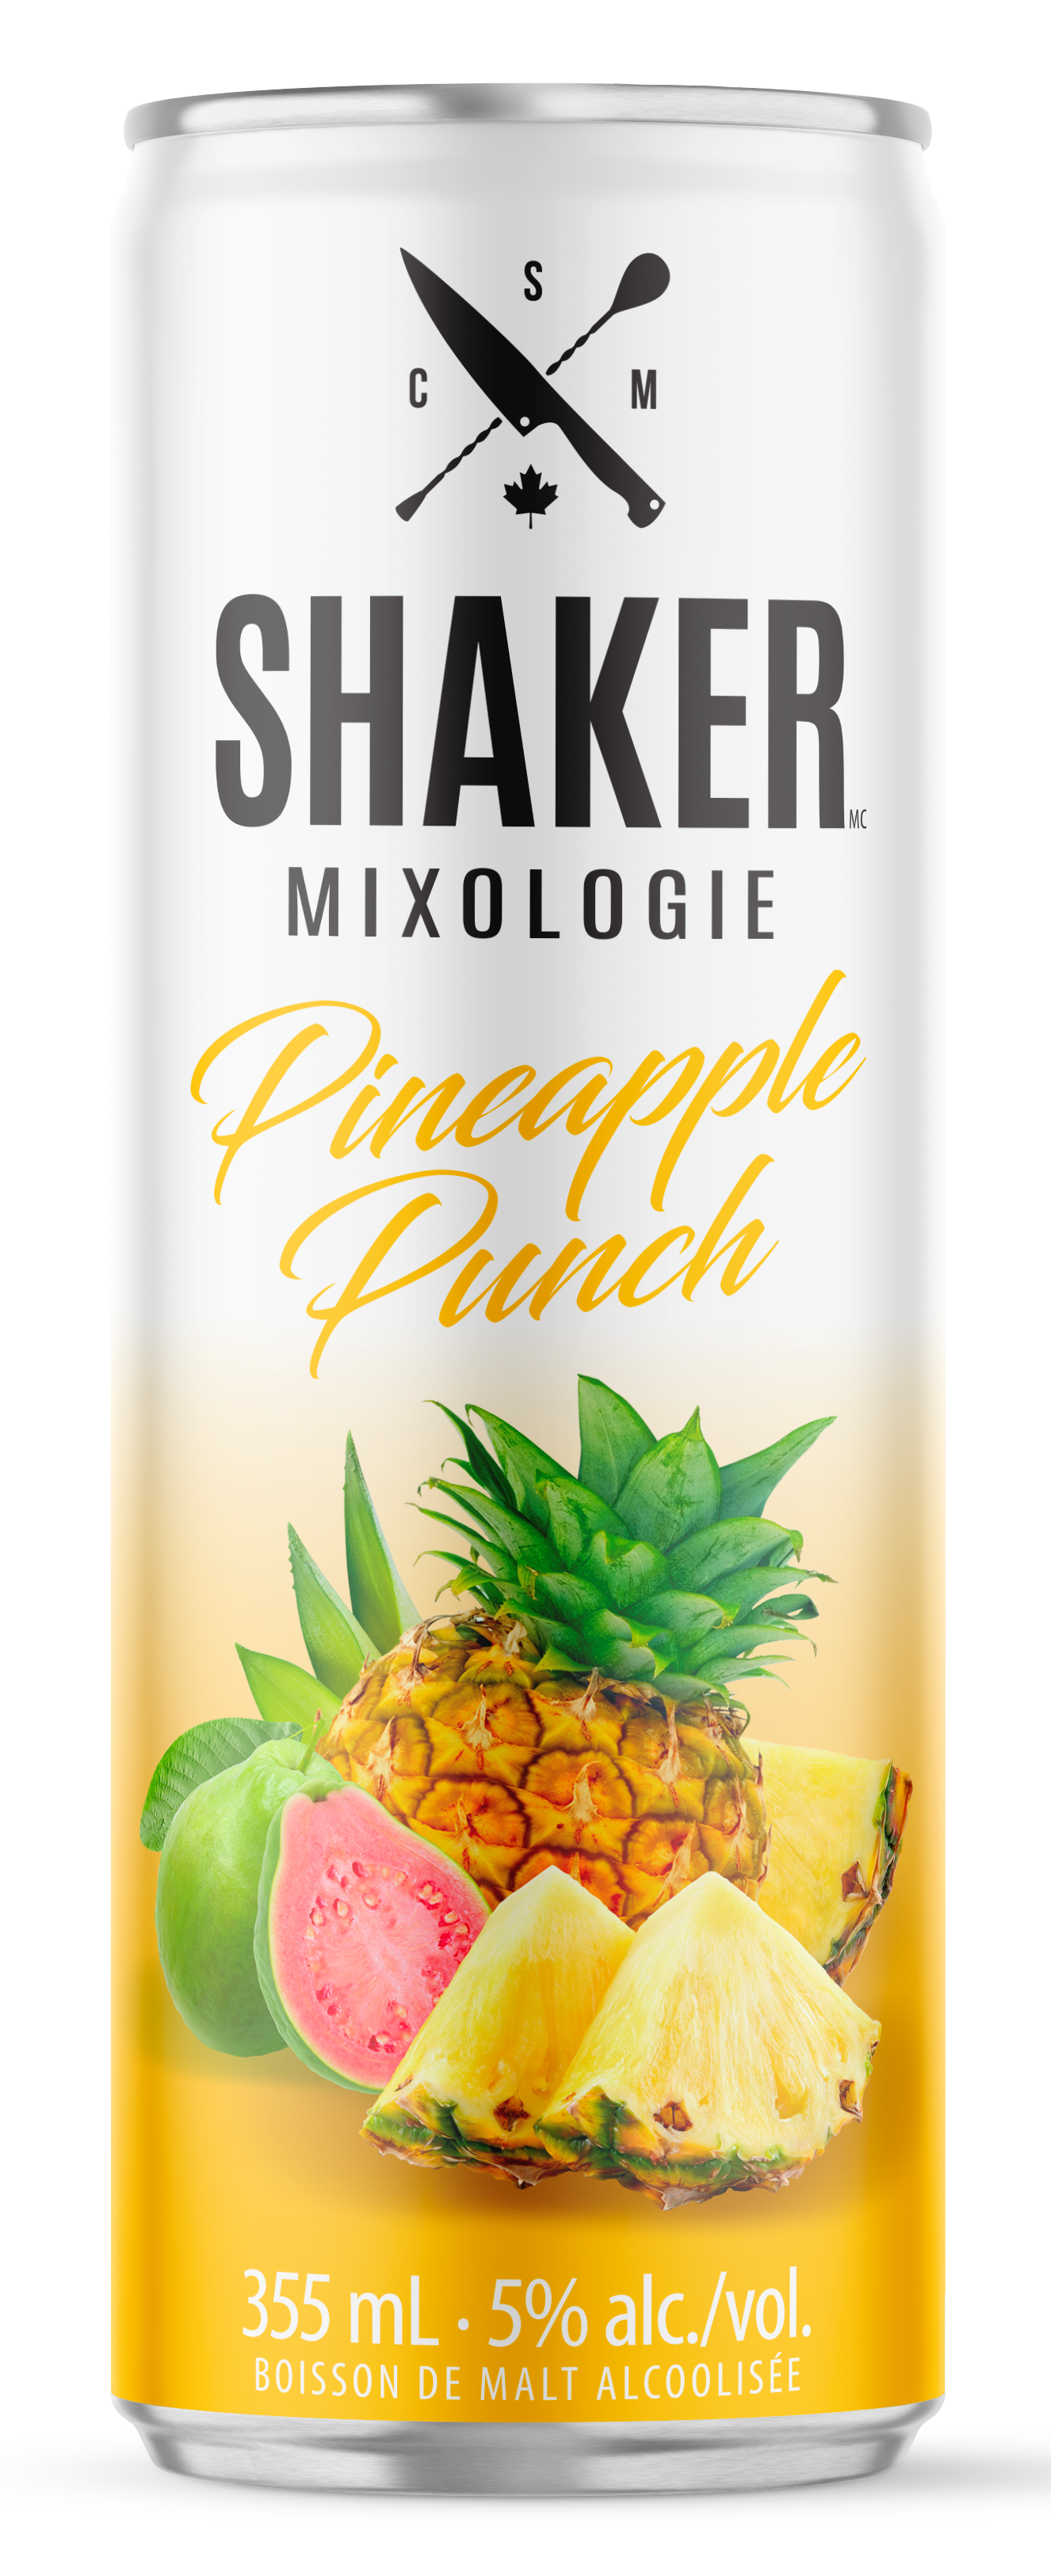 can Pineapple Punch